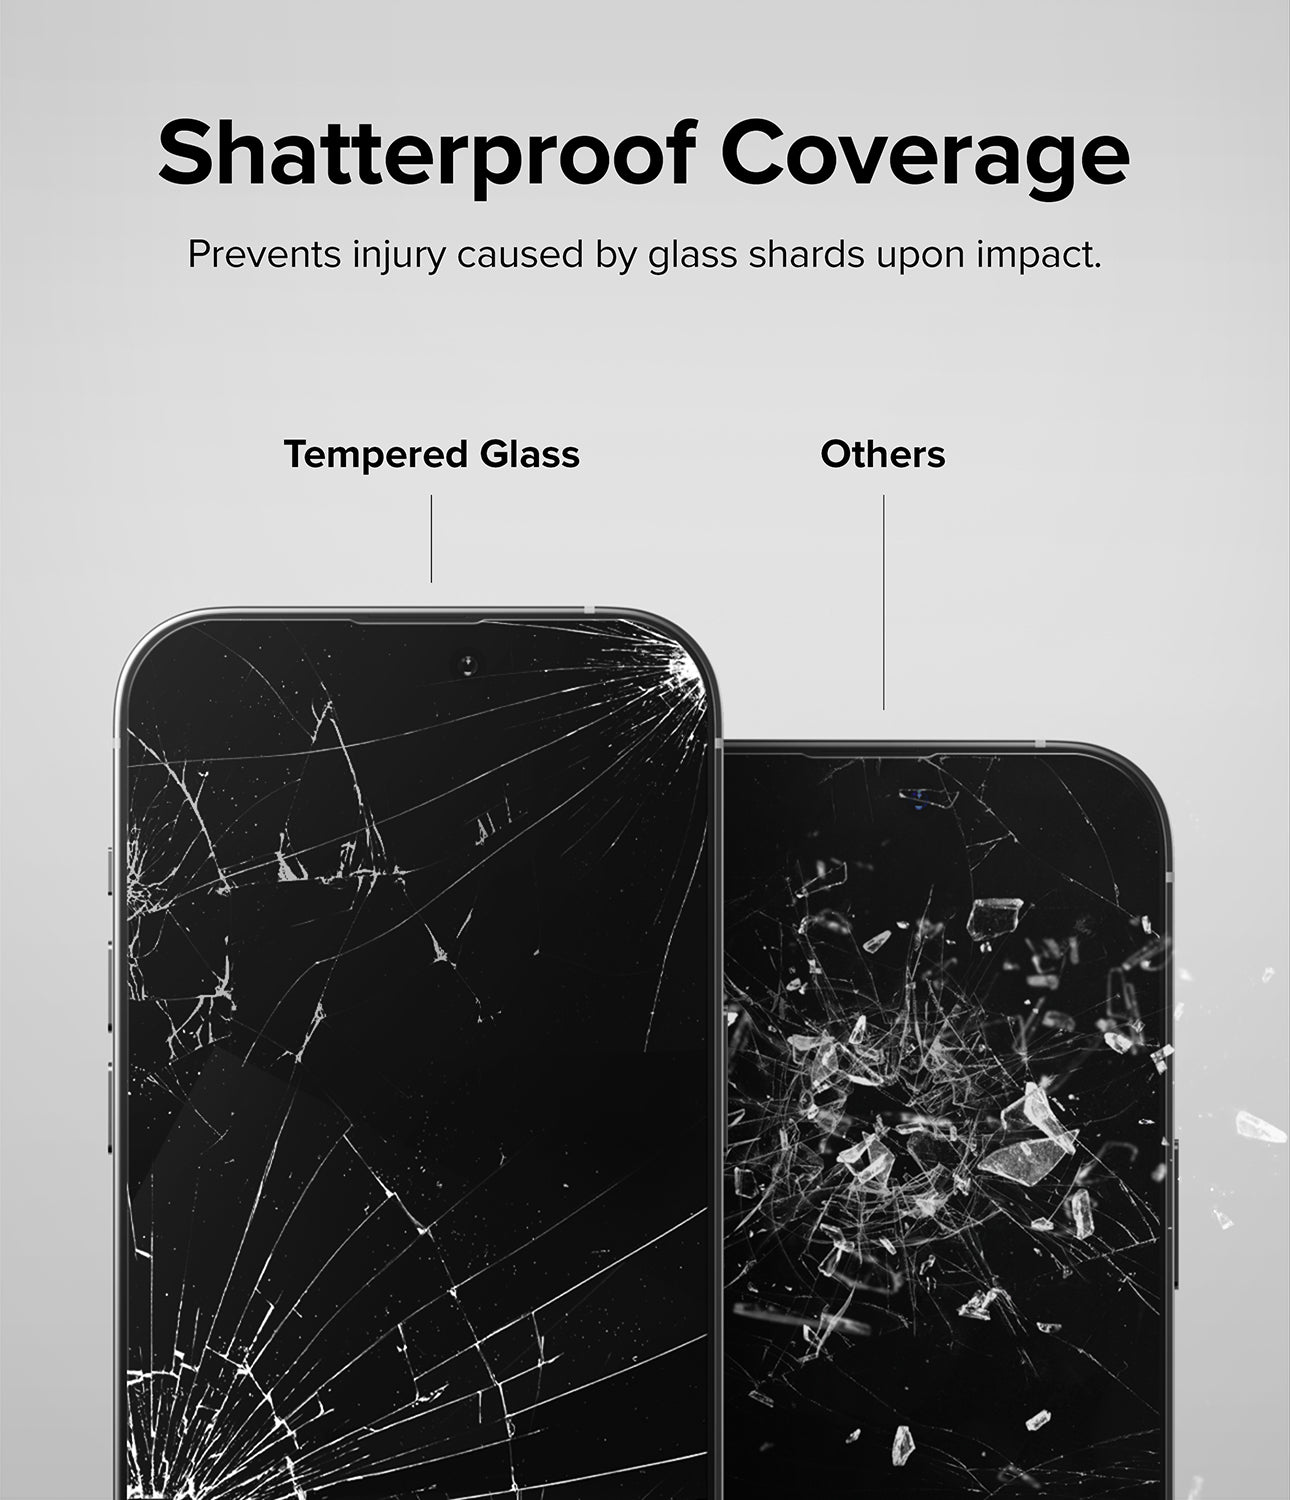 iPhone 14 Pro Max Screen Protector | Full Cover Glass - Shatterproof Coverage. Prevents injury caused by glass shards upon impact.